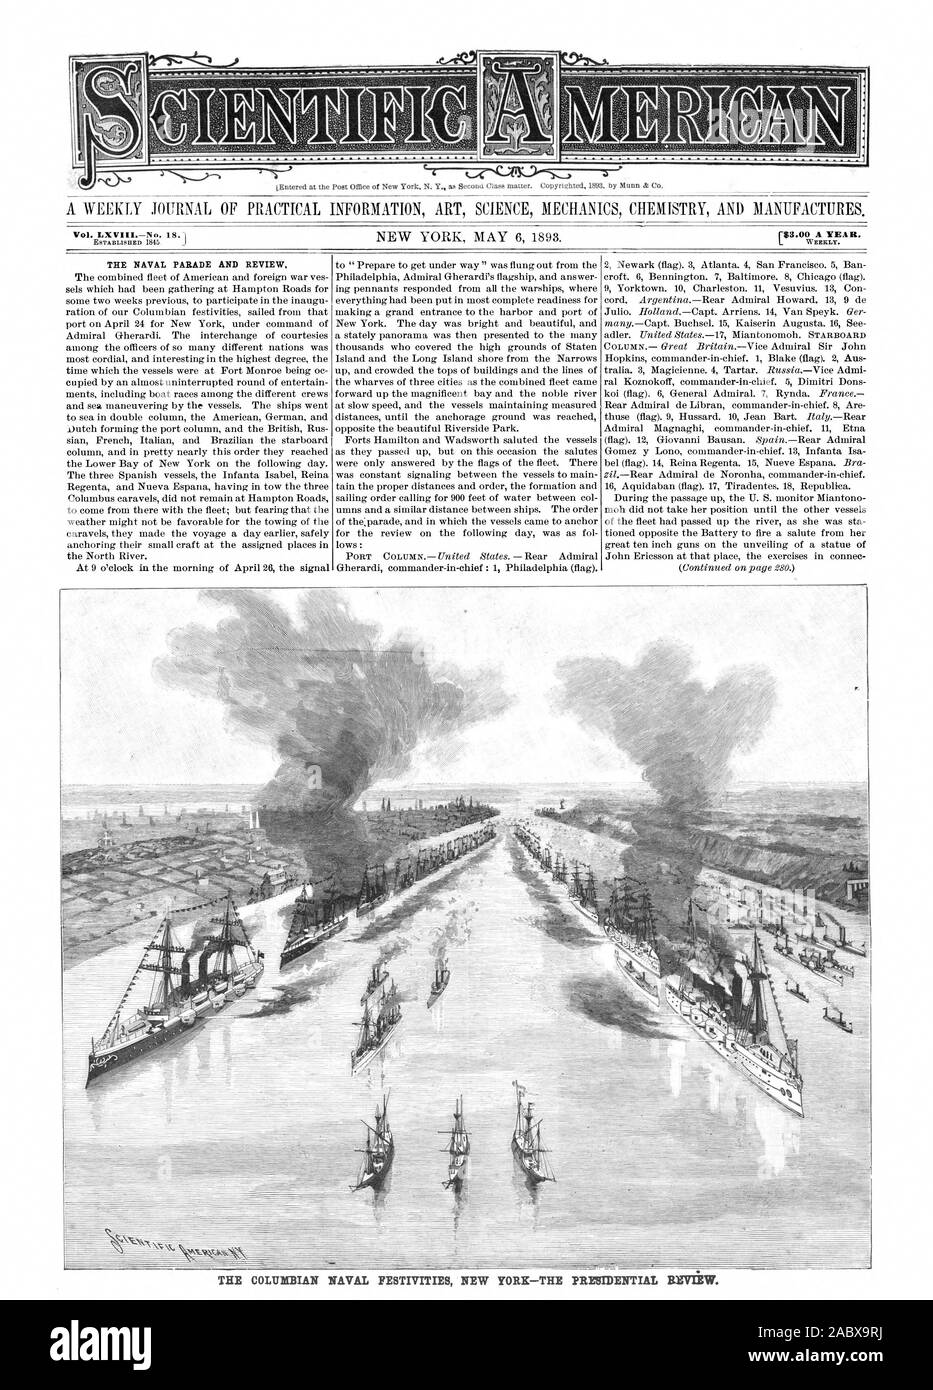 A WEEKLY JOURNAL OF PRACTICAL INFORMATION ART SCIENCE MECHANICS CHEMISTRY AND MANUFACTURES. WEEKLY. THE NAVAL PARADE AND REVIEW, scientific american, 1893-05-06 Stock Photo